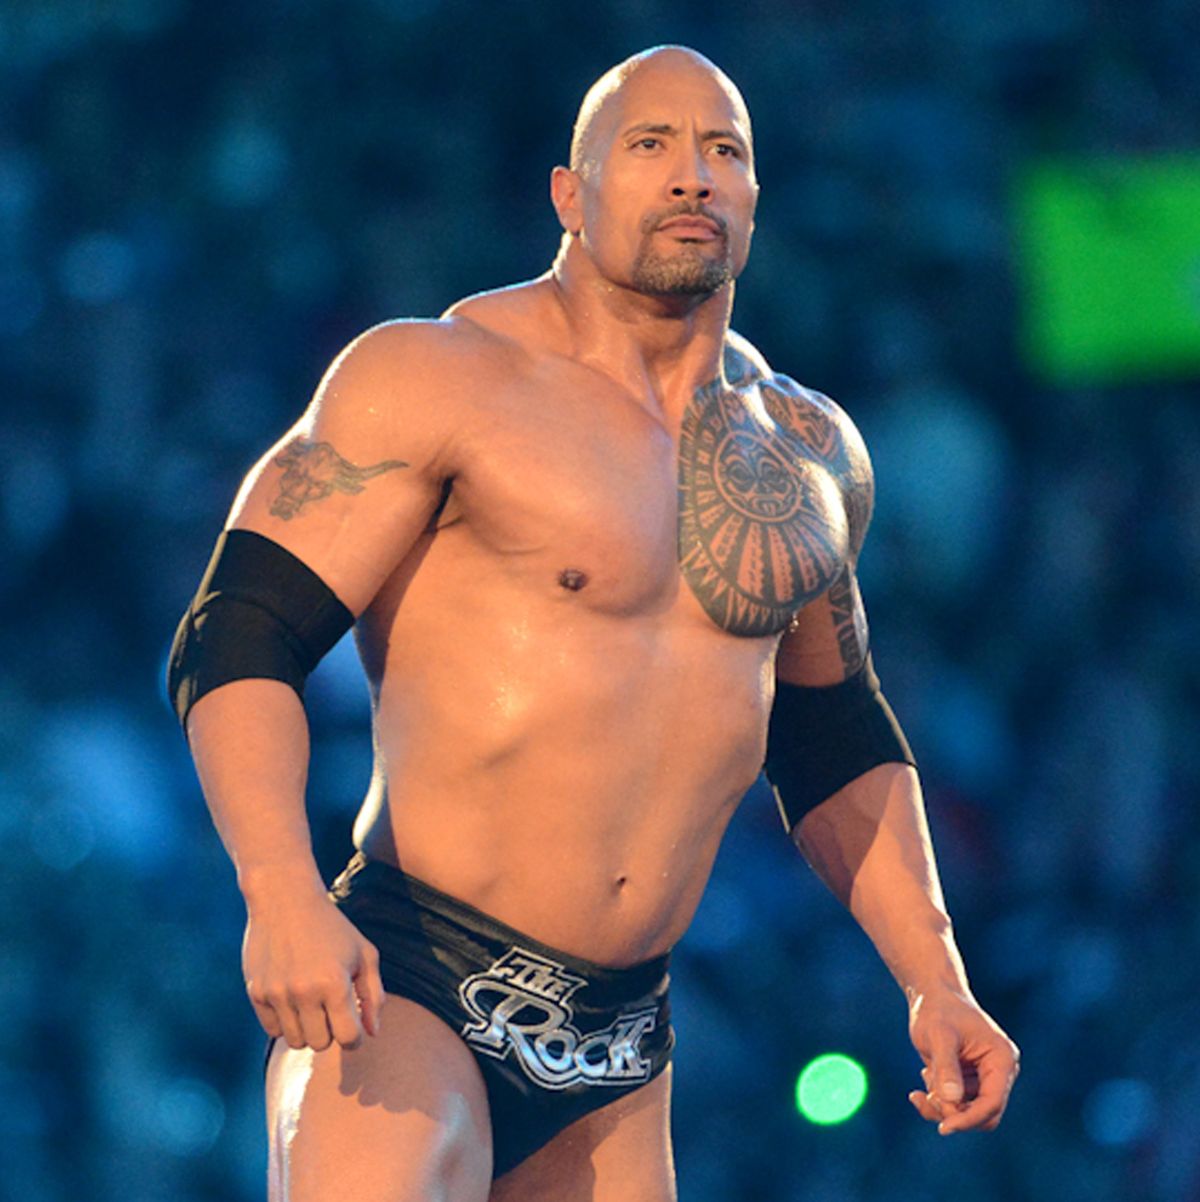 The Rock Is Returning to WWE on Fox's Smackdown! Live on Friday